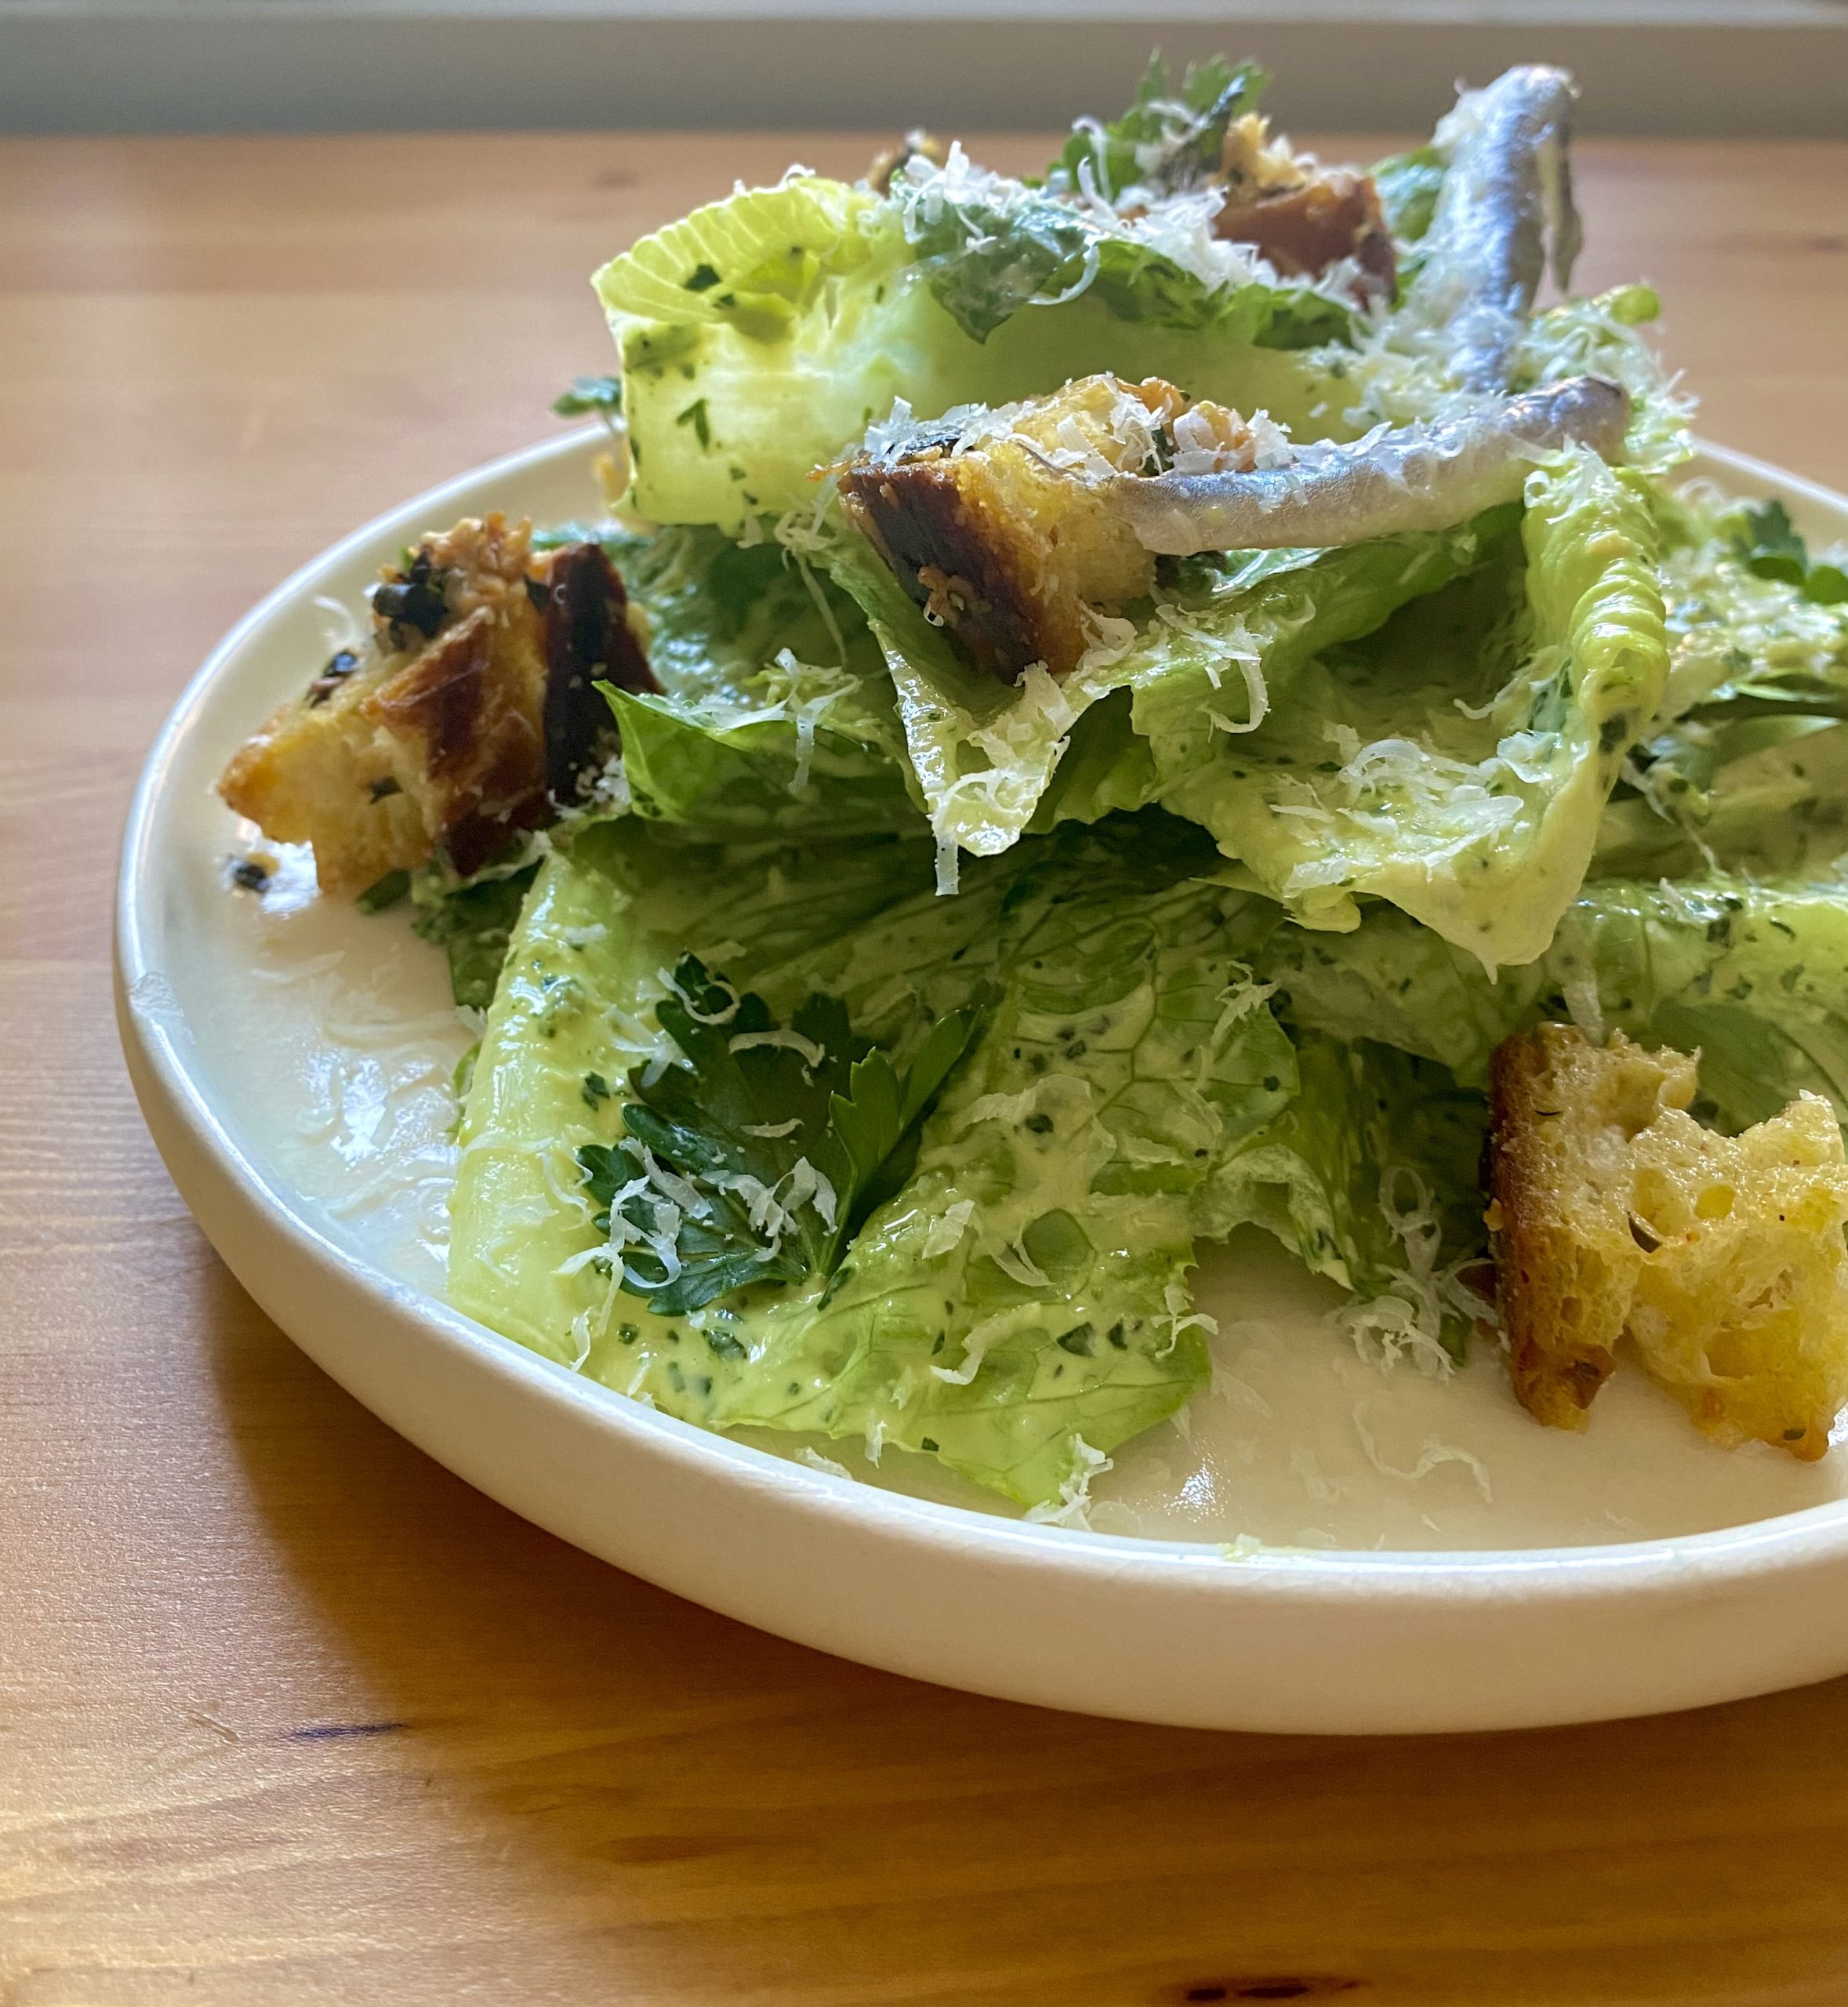 A caesar salad with parmesan and croutons.